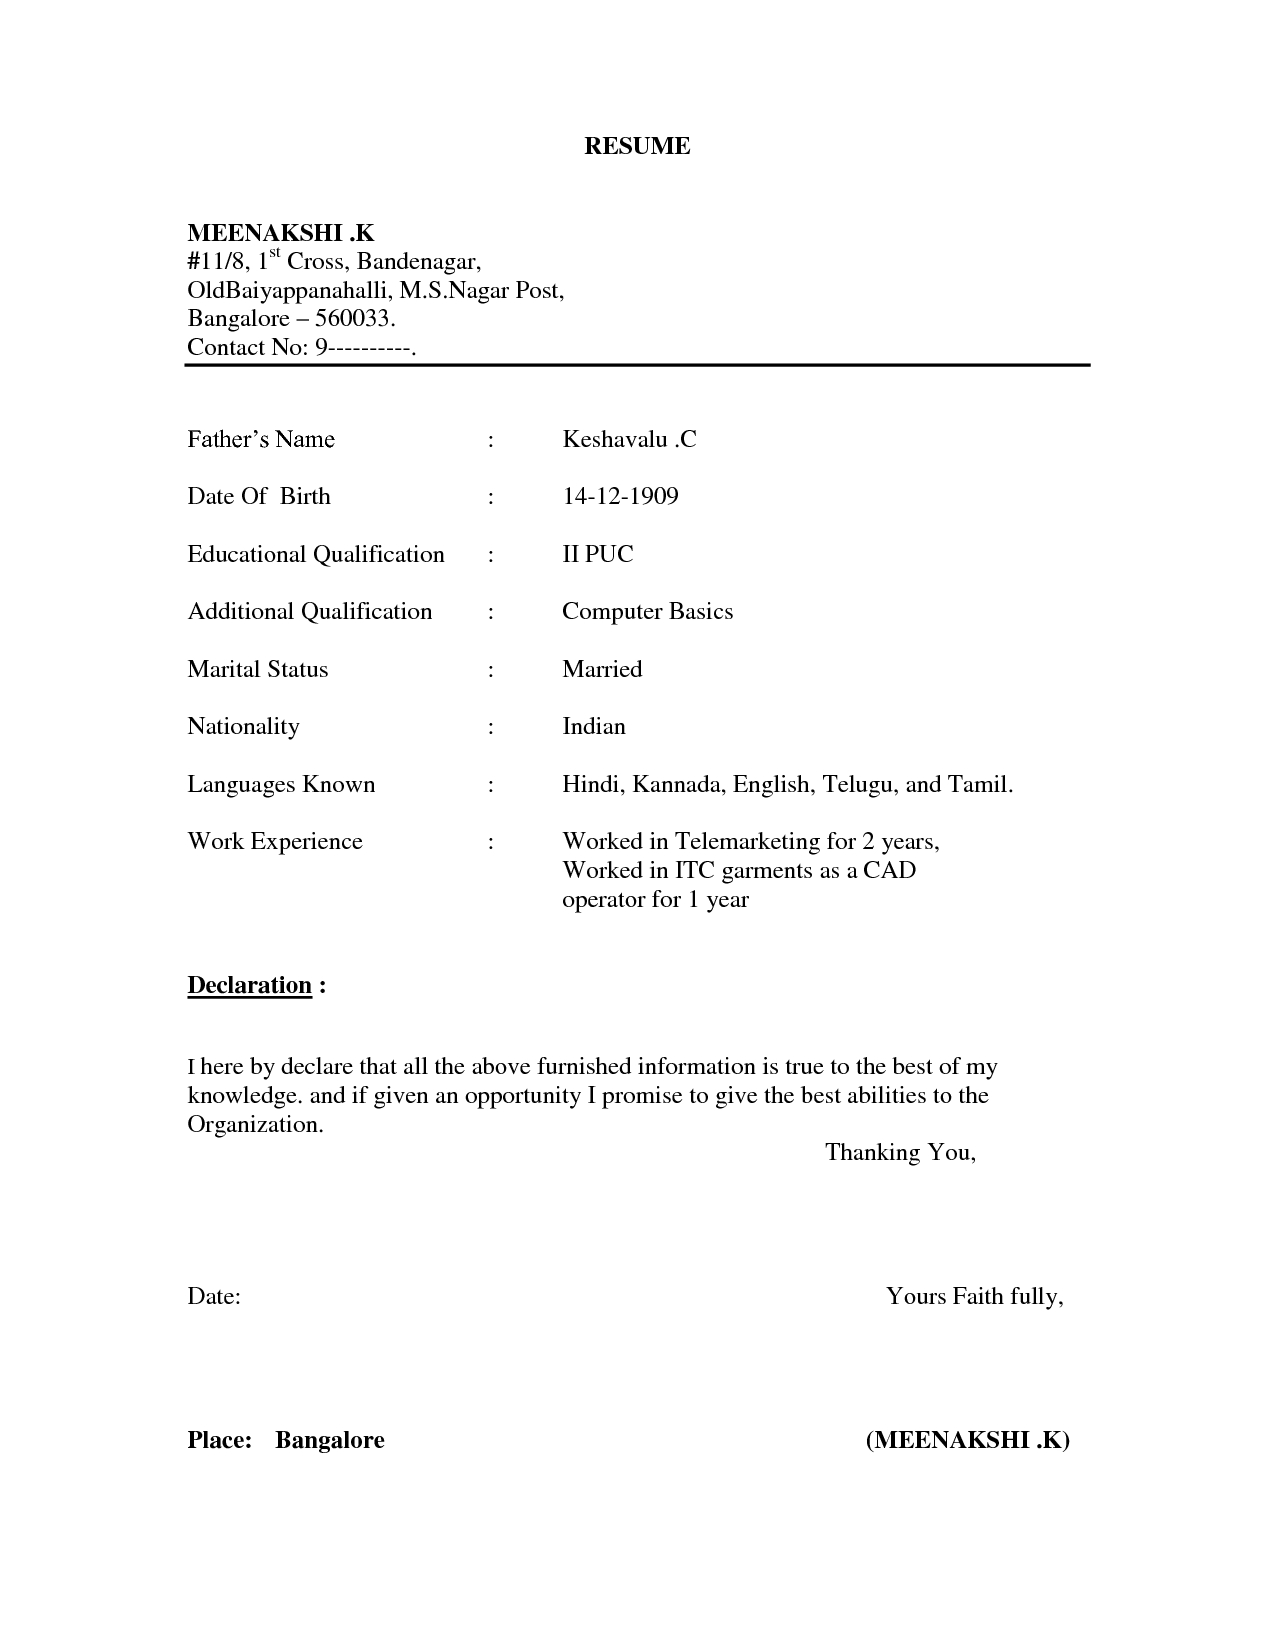 Resume Format Doc File Download Resume Format Doc File Download with sizing 1275 X 1650